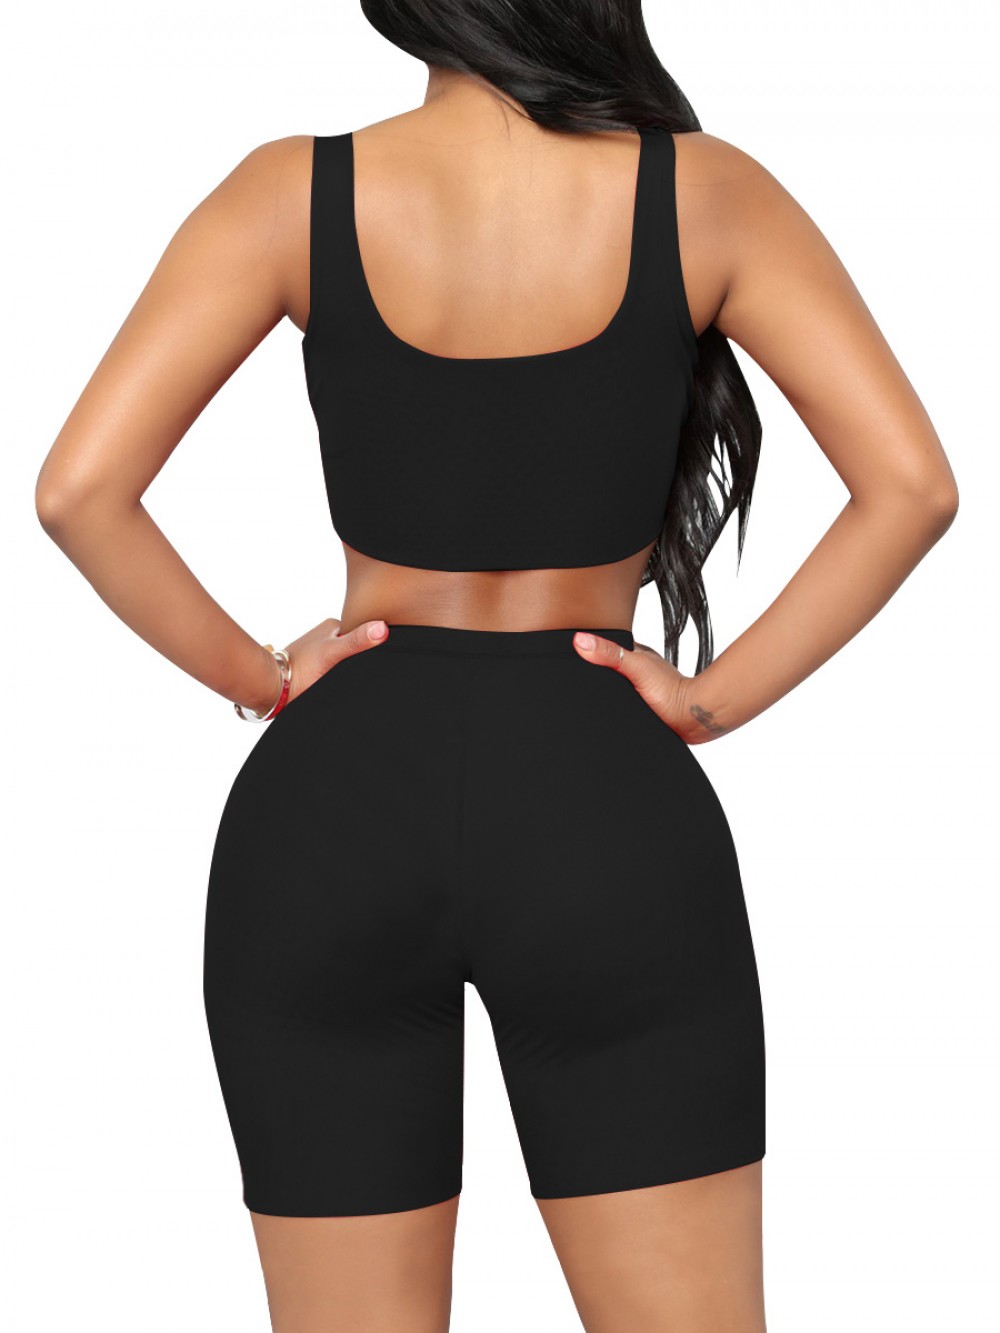 Upgrade Black Training Suits High Waist Scoop Neck High Elasticity Sanded Fabric